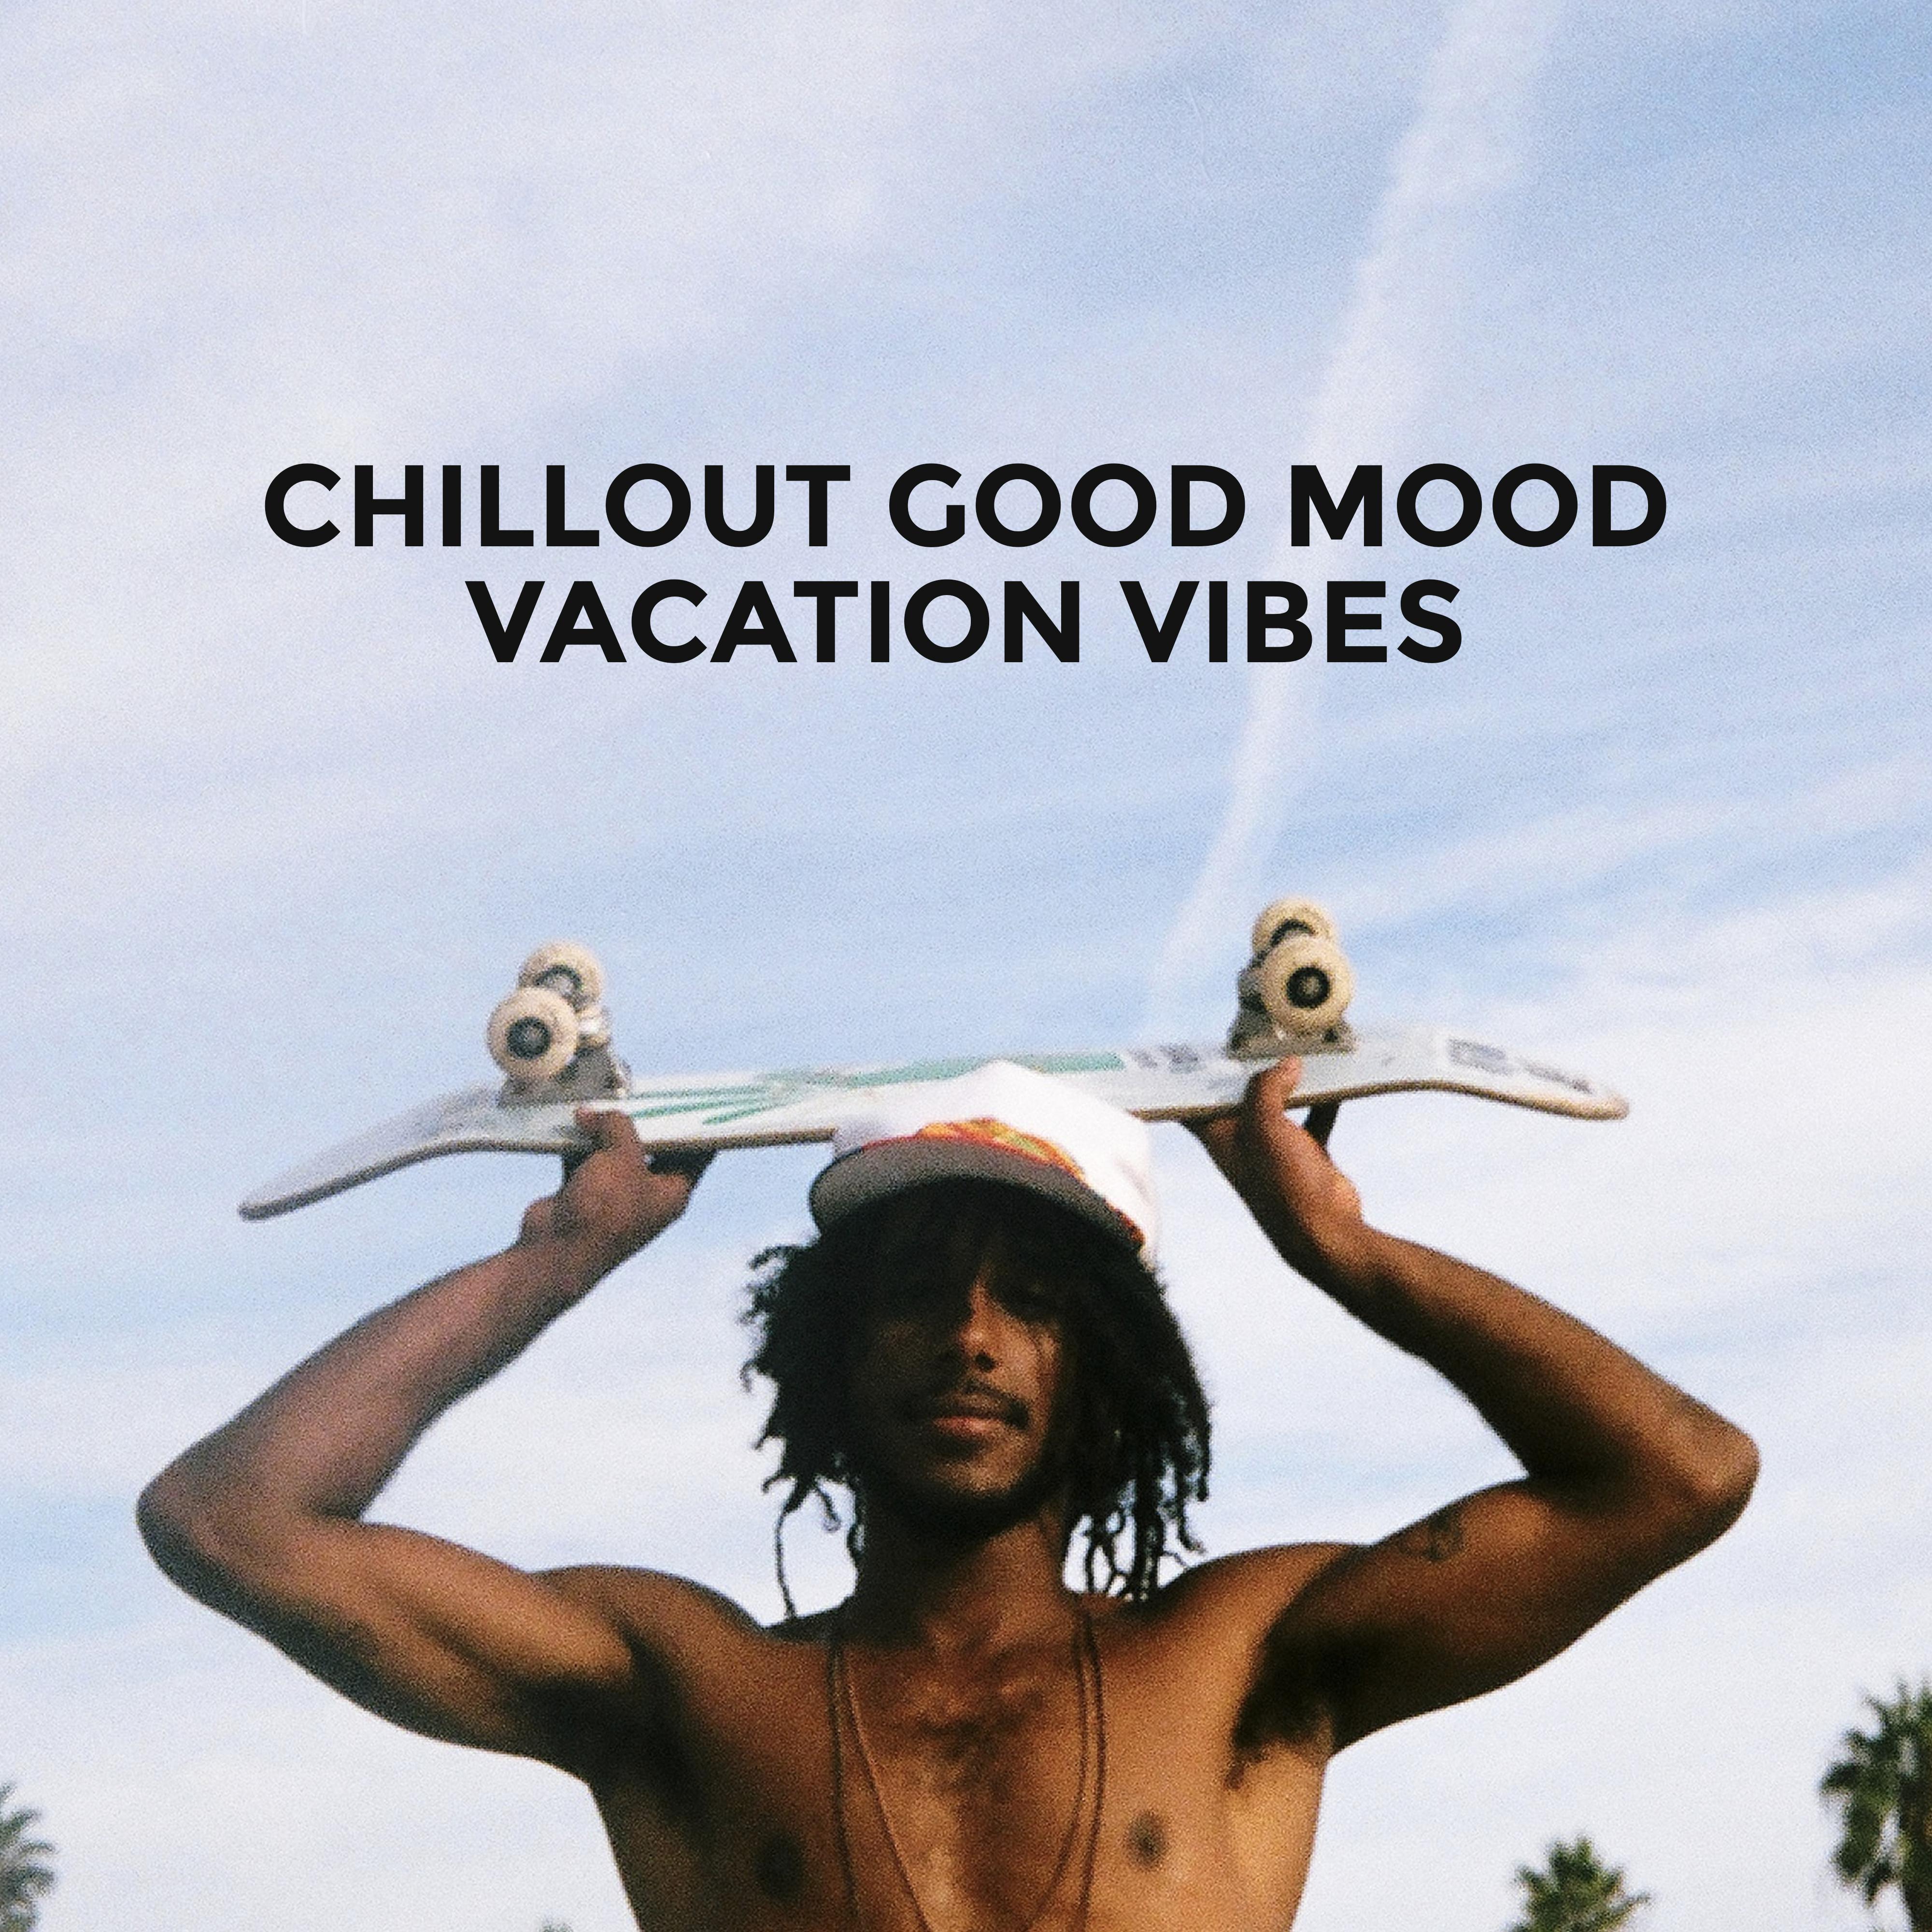 Chillout Good Mood Vacation Vibes: 2019 Chill Out Holiday Compilation, Music Perfect for Summer Relaxation on the Beach or by the Pool, Celebration of This Blissful Time